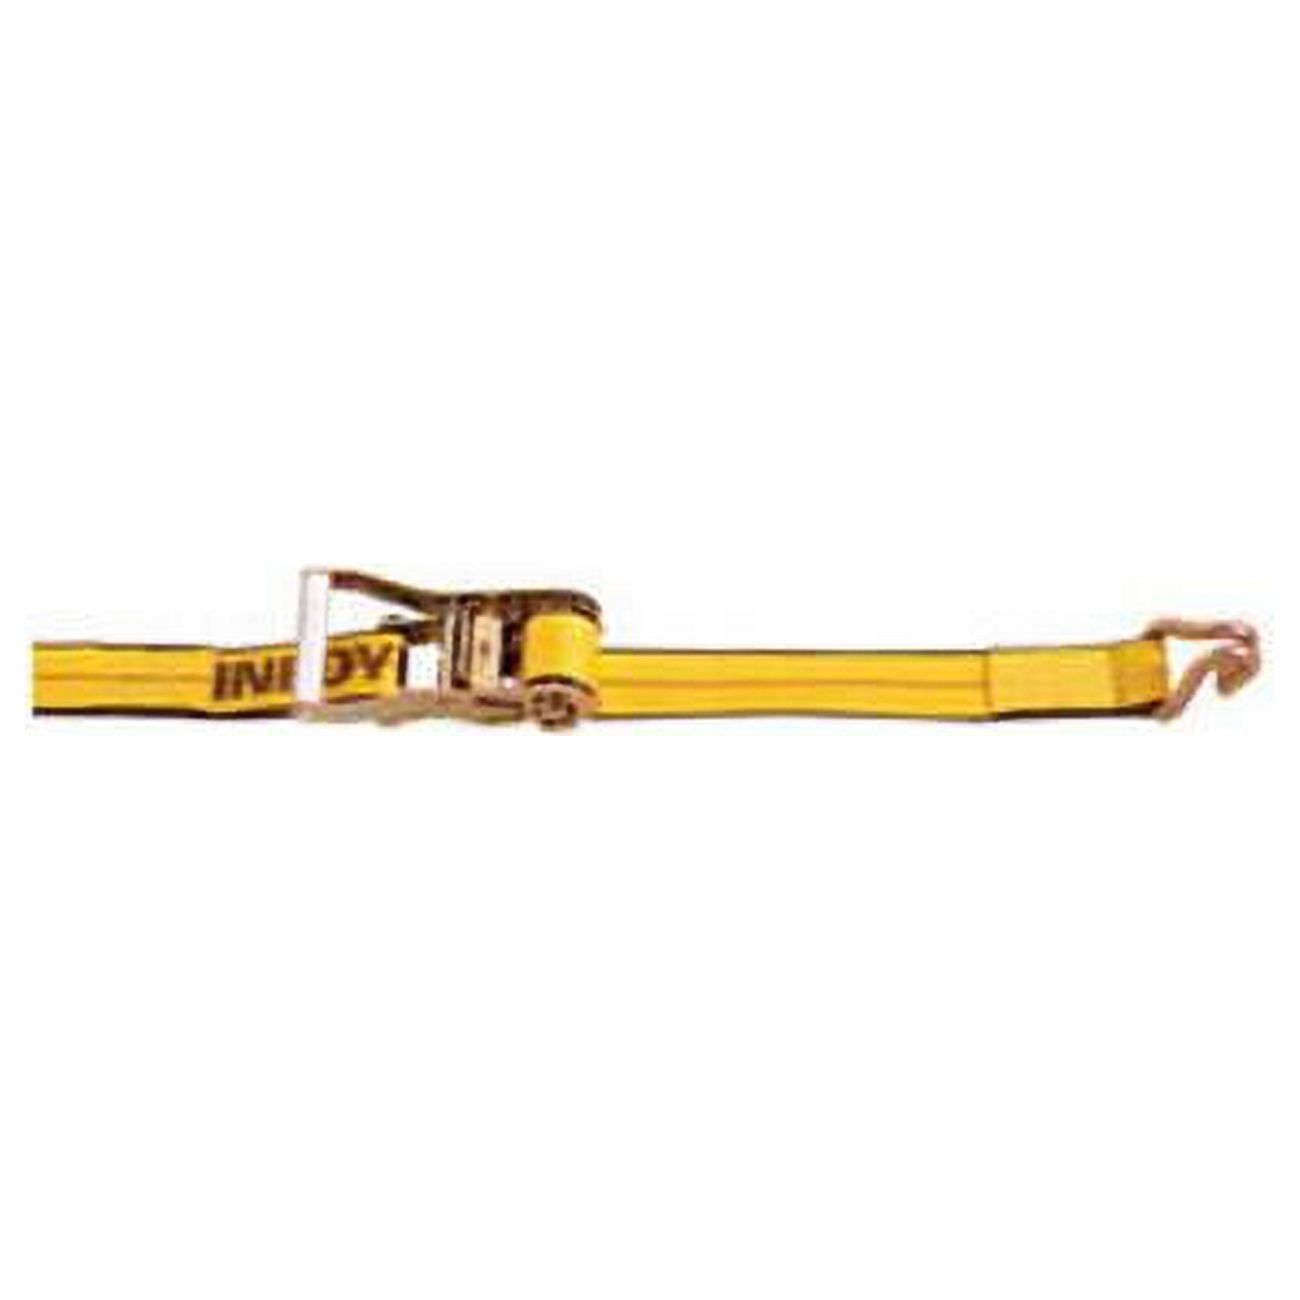 513084das 2 X 30 Ft. Ratchet Strap With Wire Hooks